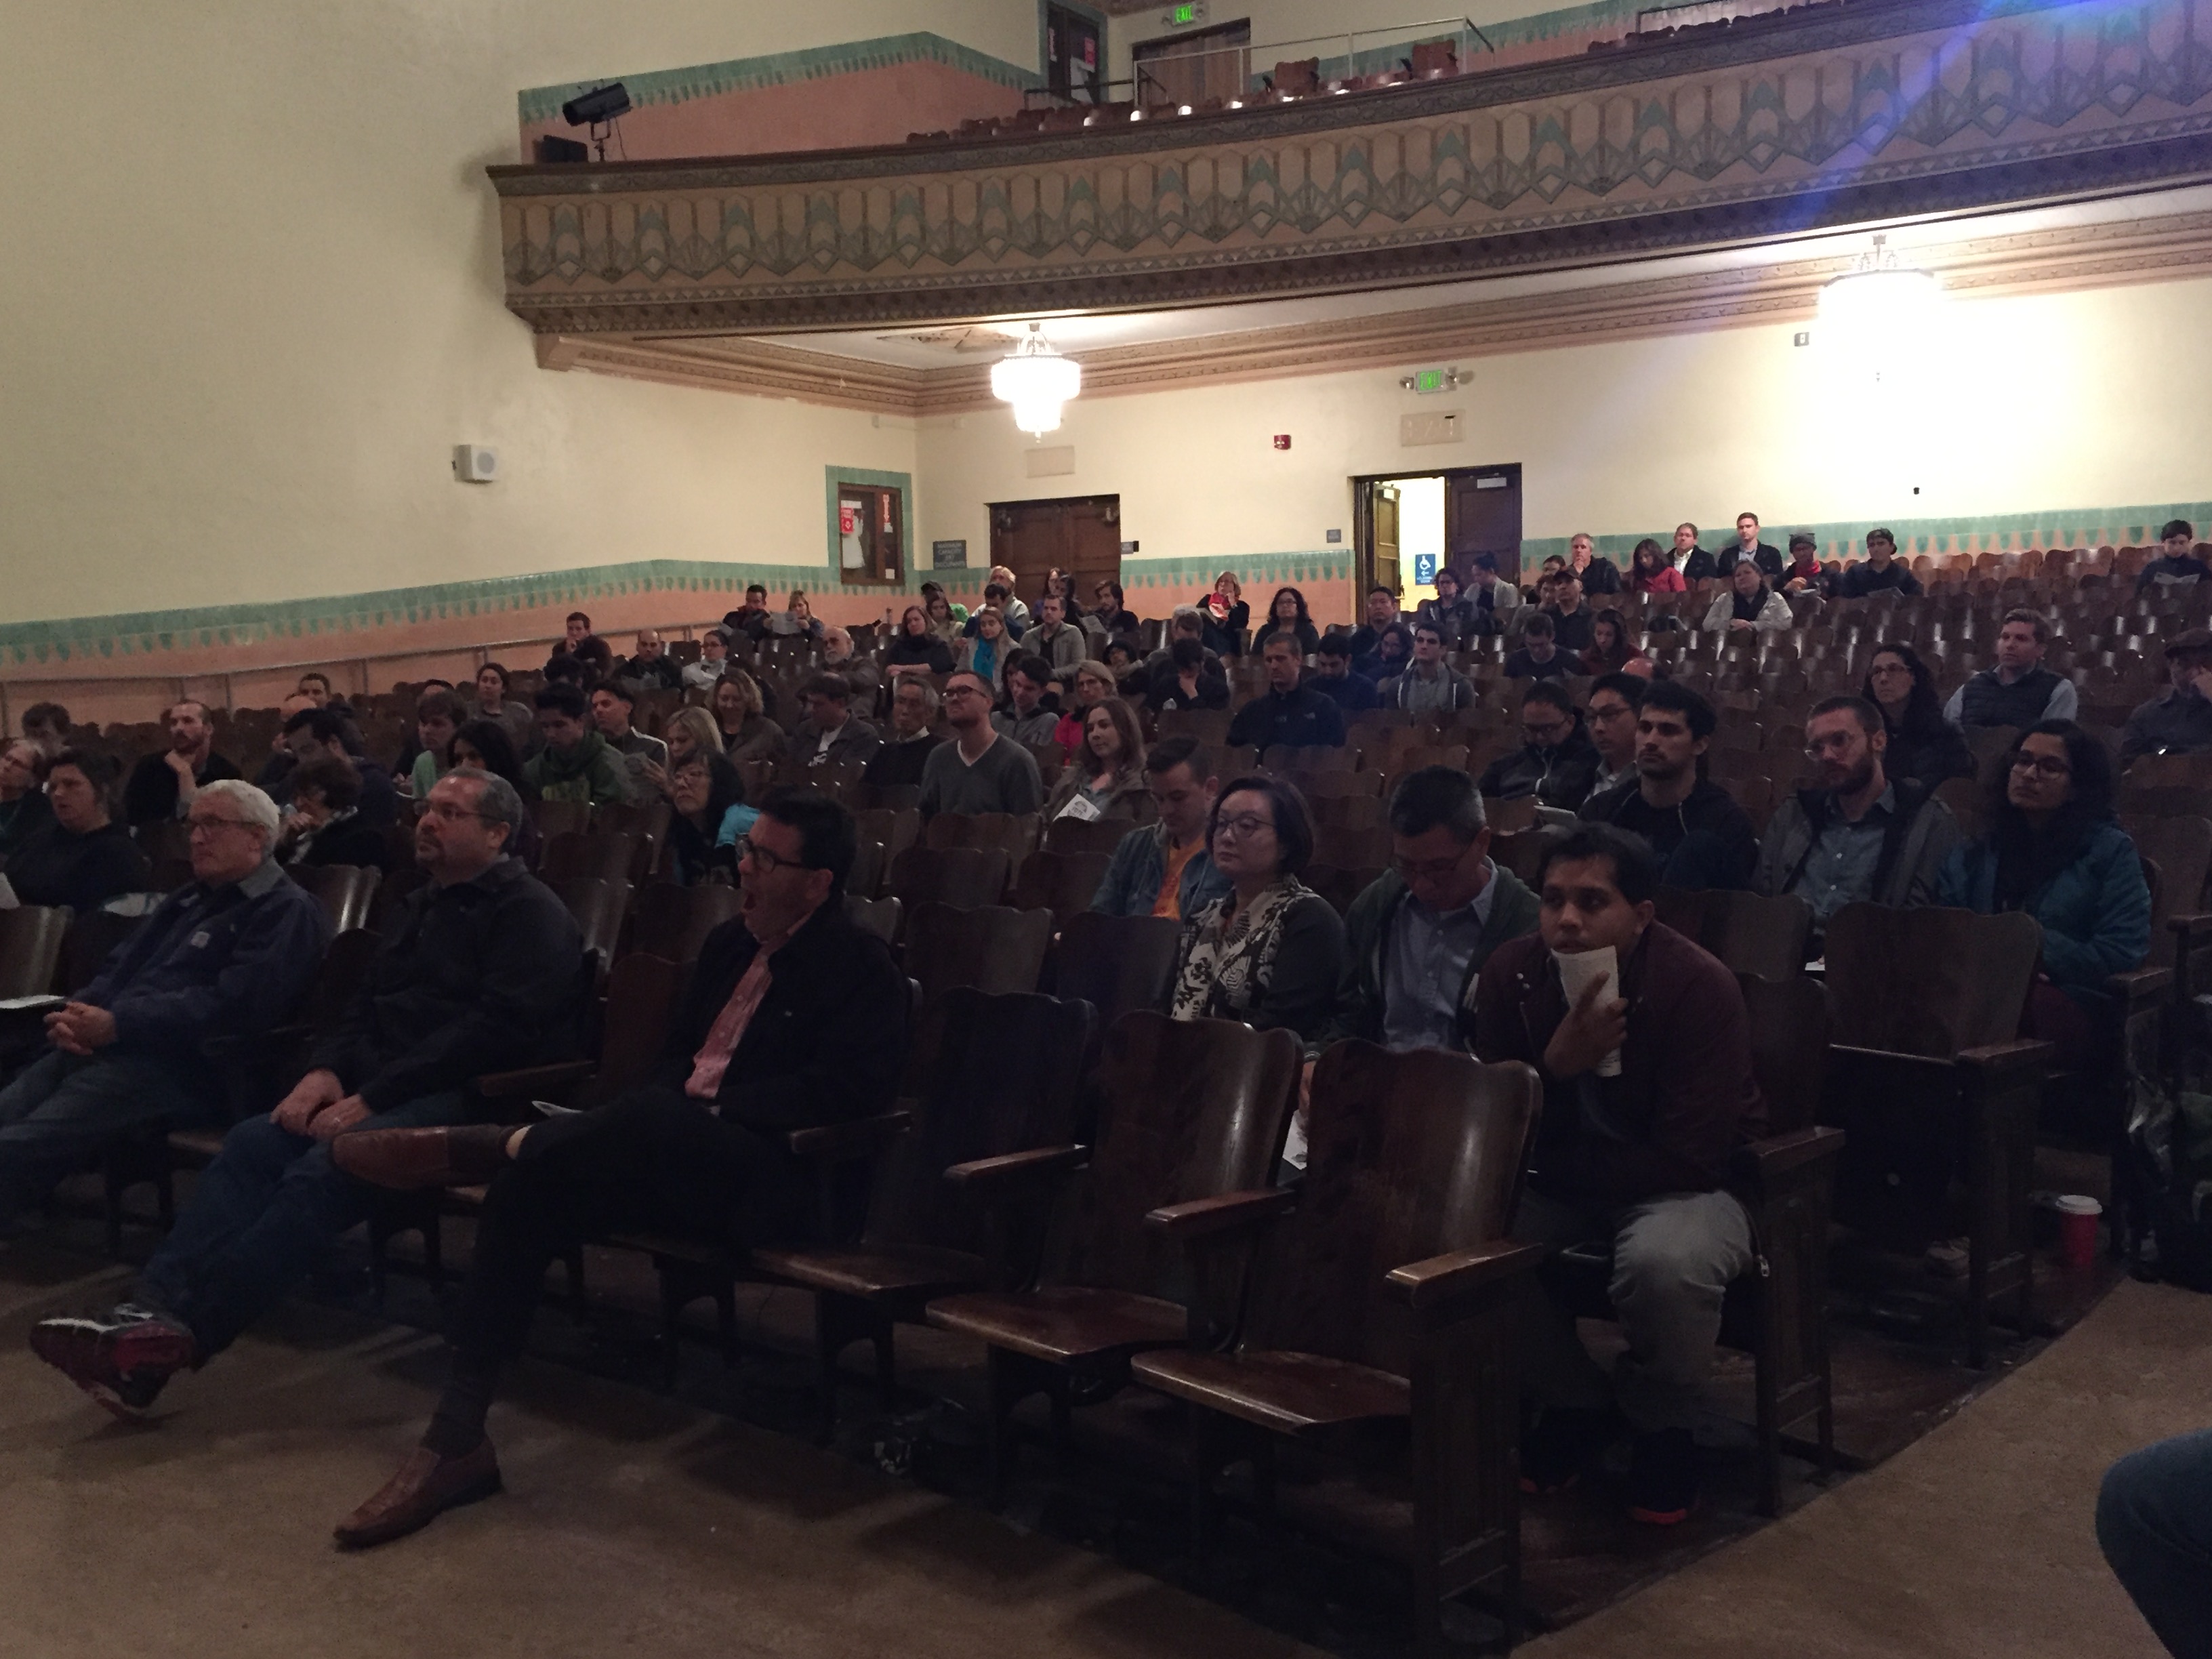 The audience at Wednesday night's debate, held in the auditorium of Presidio Middle School